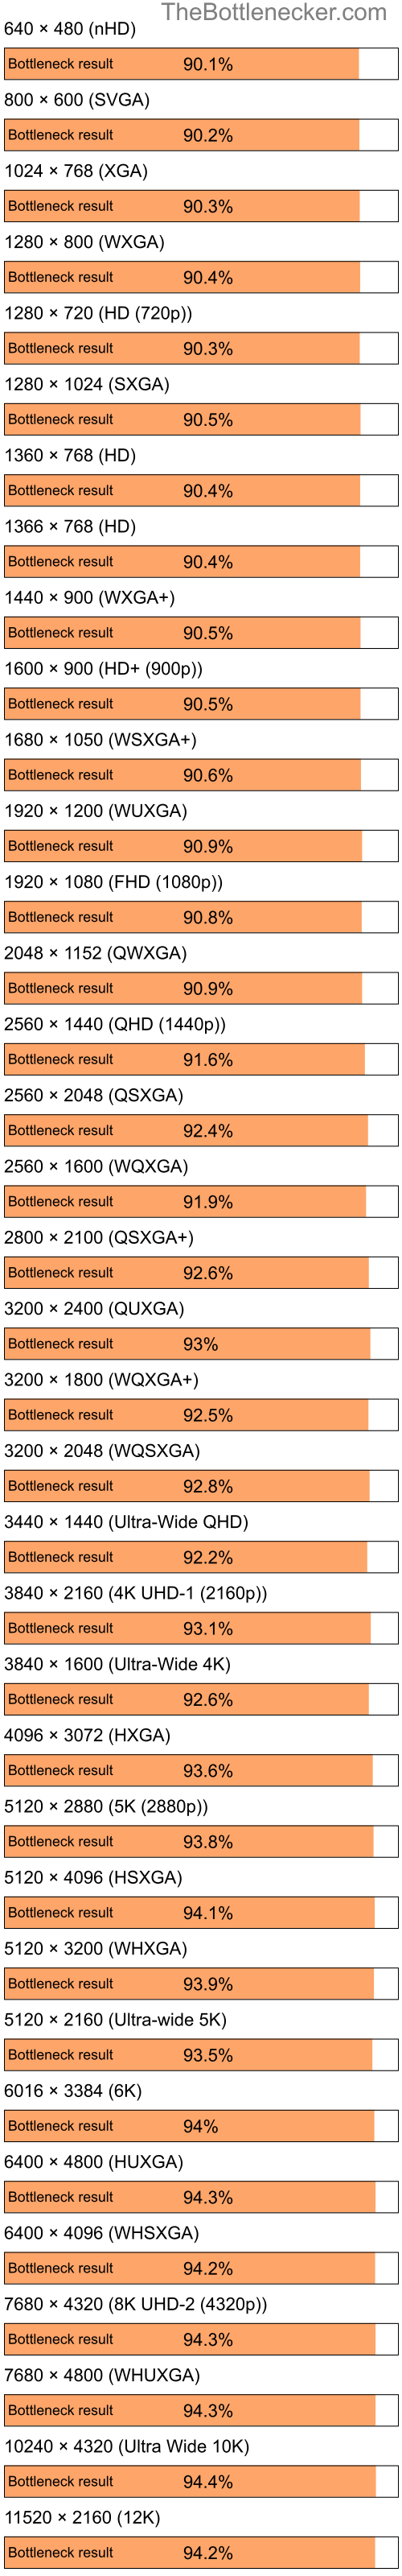 Bottleneck results by resolution for Intel Pentium 4 and NVIDIA GeForce2 MX in General Tasks